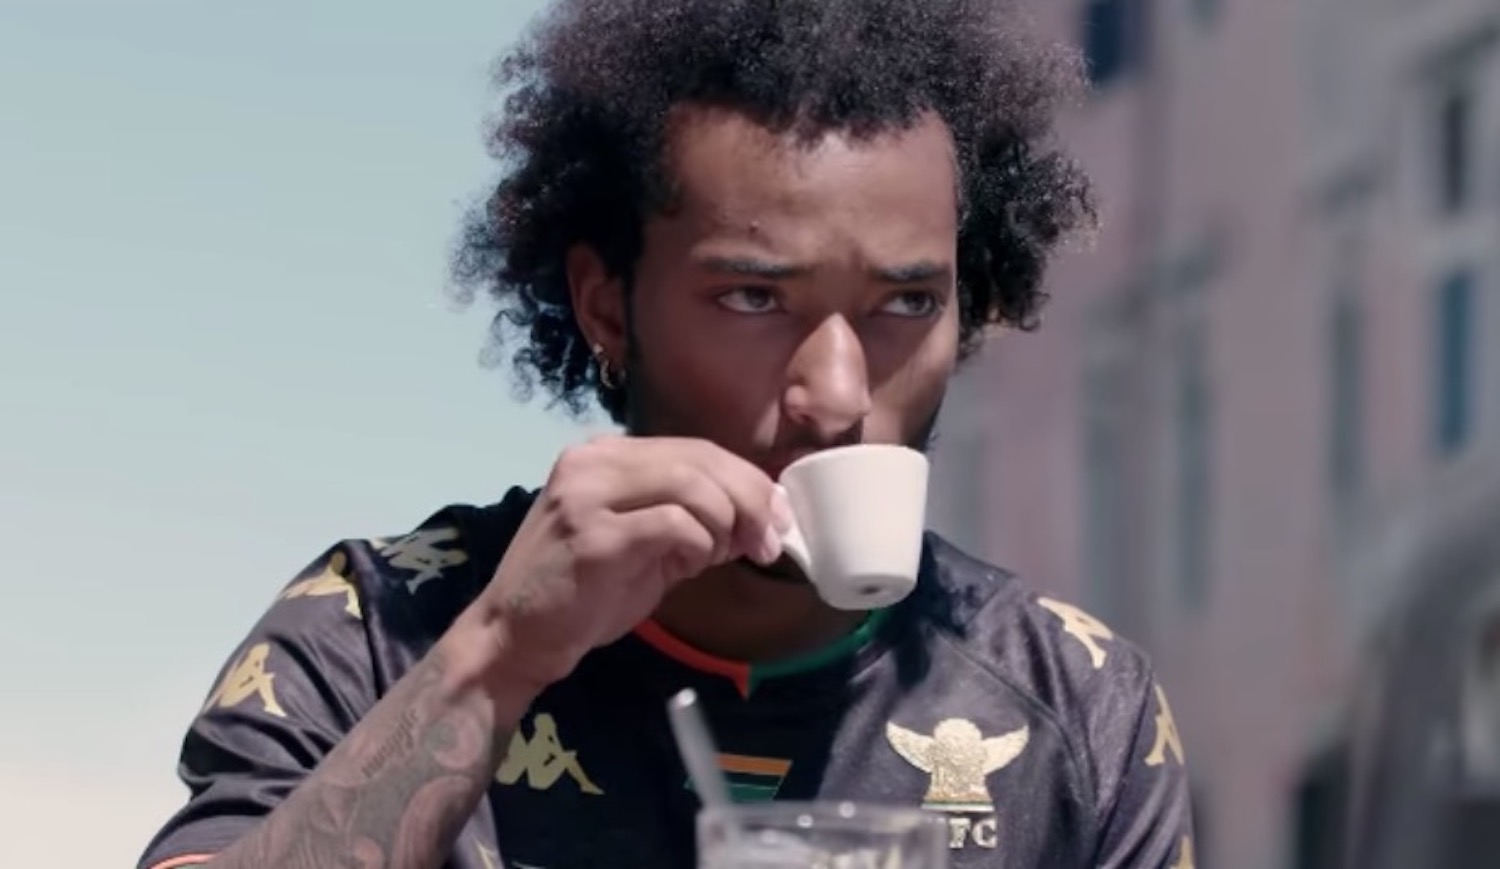 Busio sips on an espresso after joining Venezia.